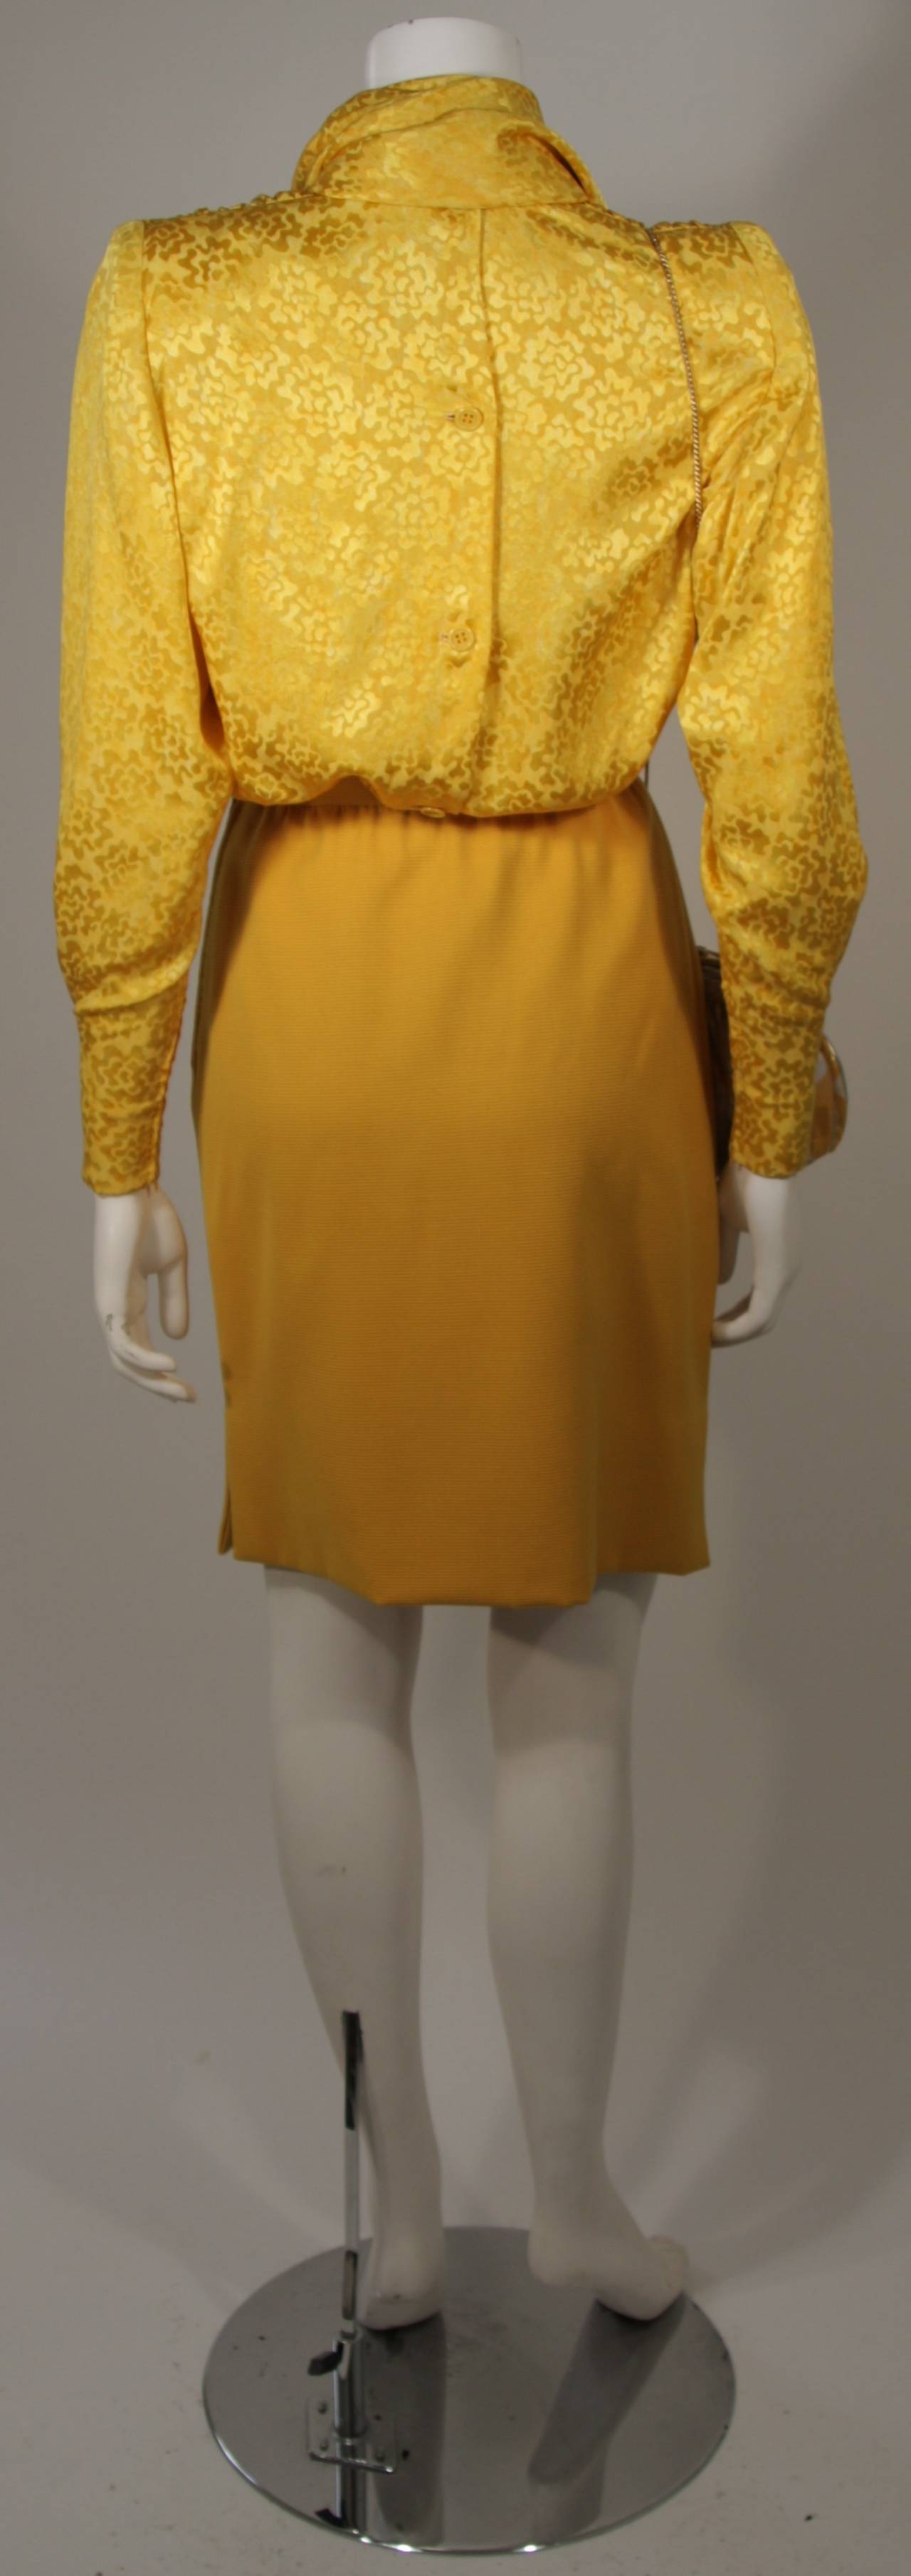 Galanos Yellow Silk Blouse and Skirt Ensemble with Judith Leiber Purse Size 2-4 4